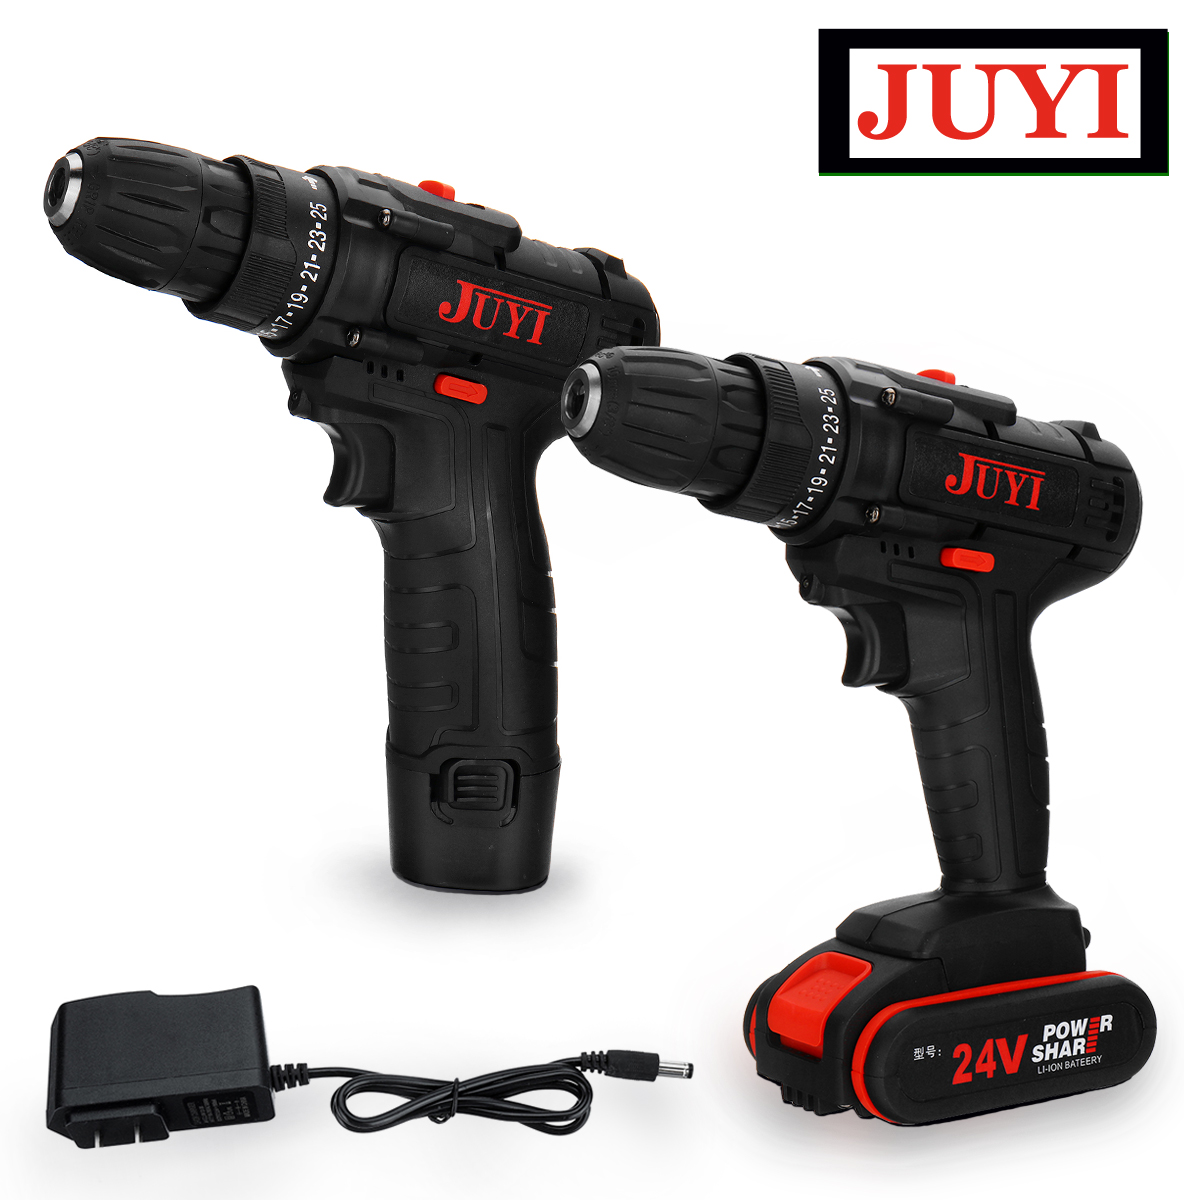 JUYI-12V24V-Lithium-Battery-Power-Drill-Cordless-Rechargeable-2-Speed-Electric-Driver-Drill-Motor-Re-1557976-2